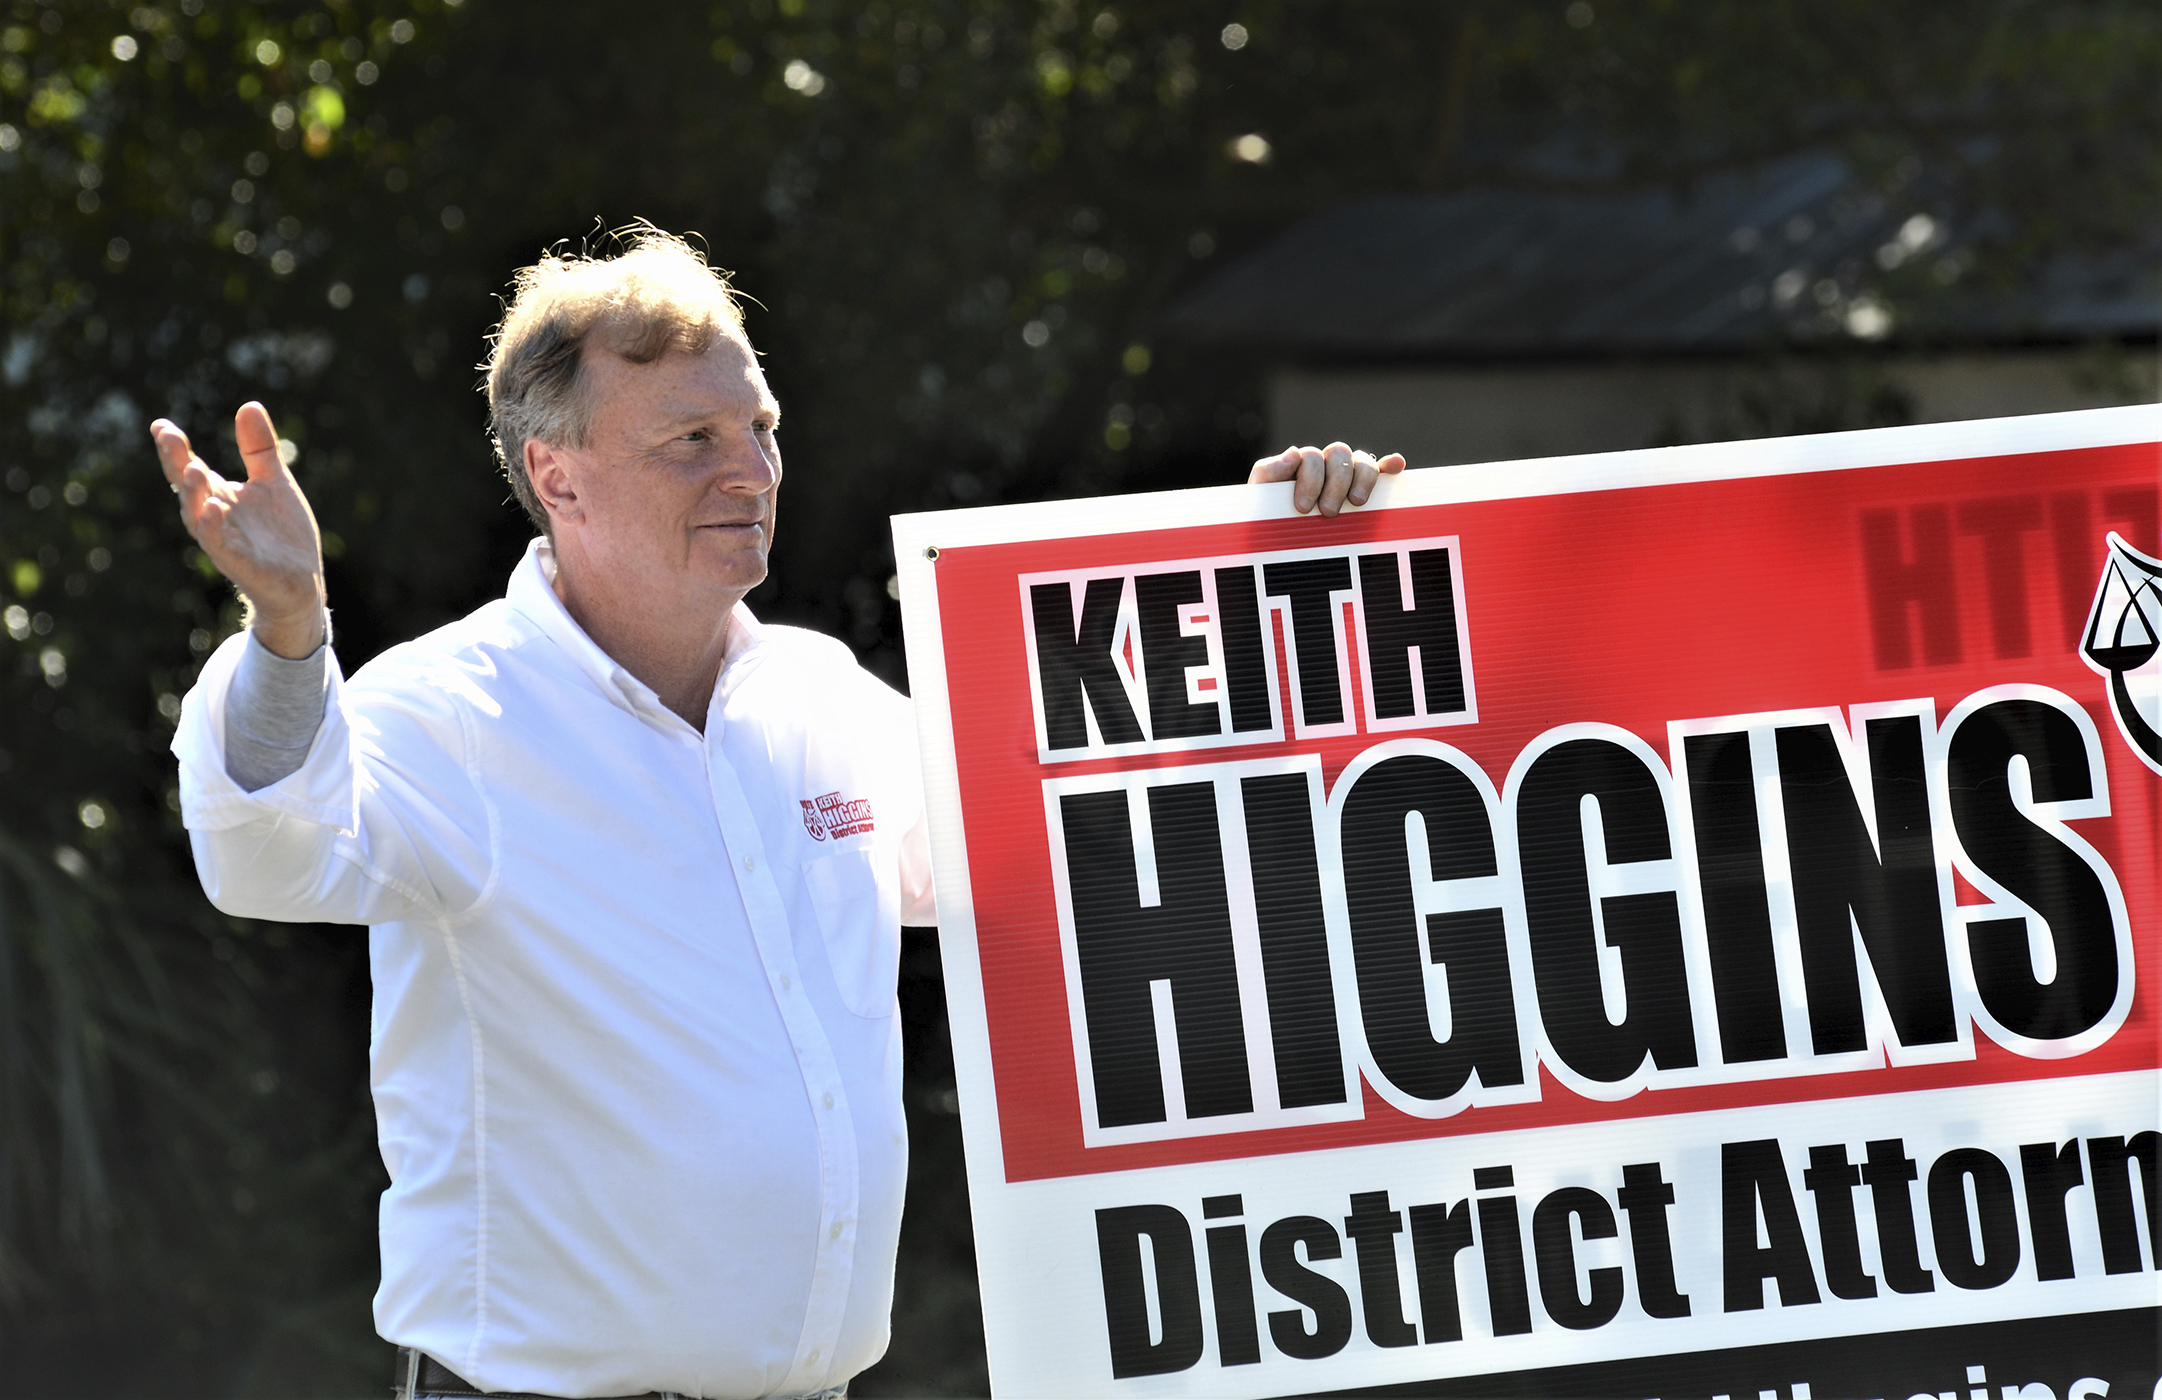 Higgins defeated District Attorney Jackie Johnson, who had been criticized for her office’s response to the February 2020 killing of Ahmaud Arbery.